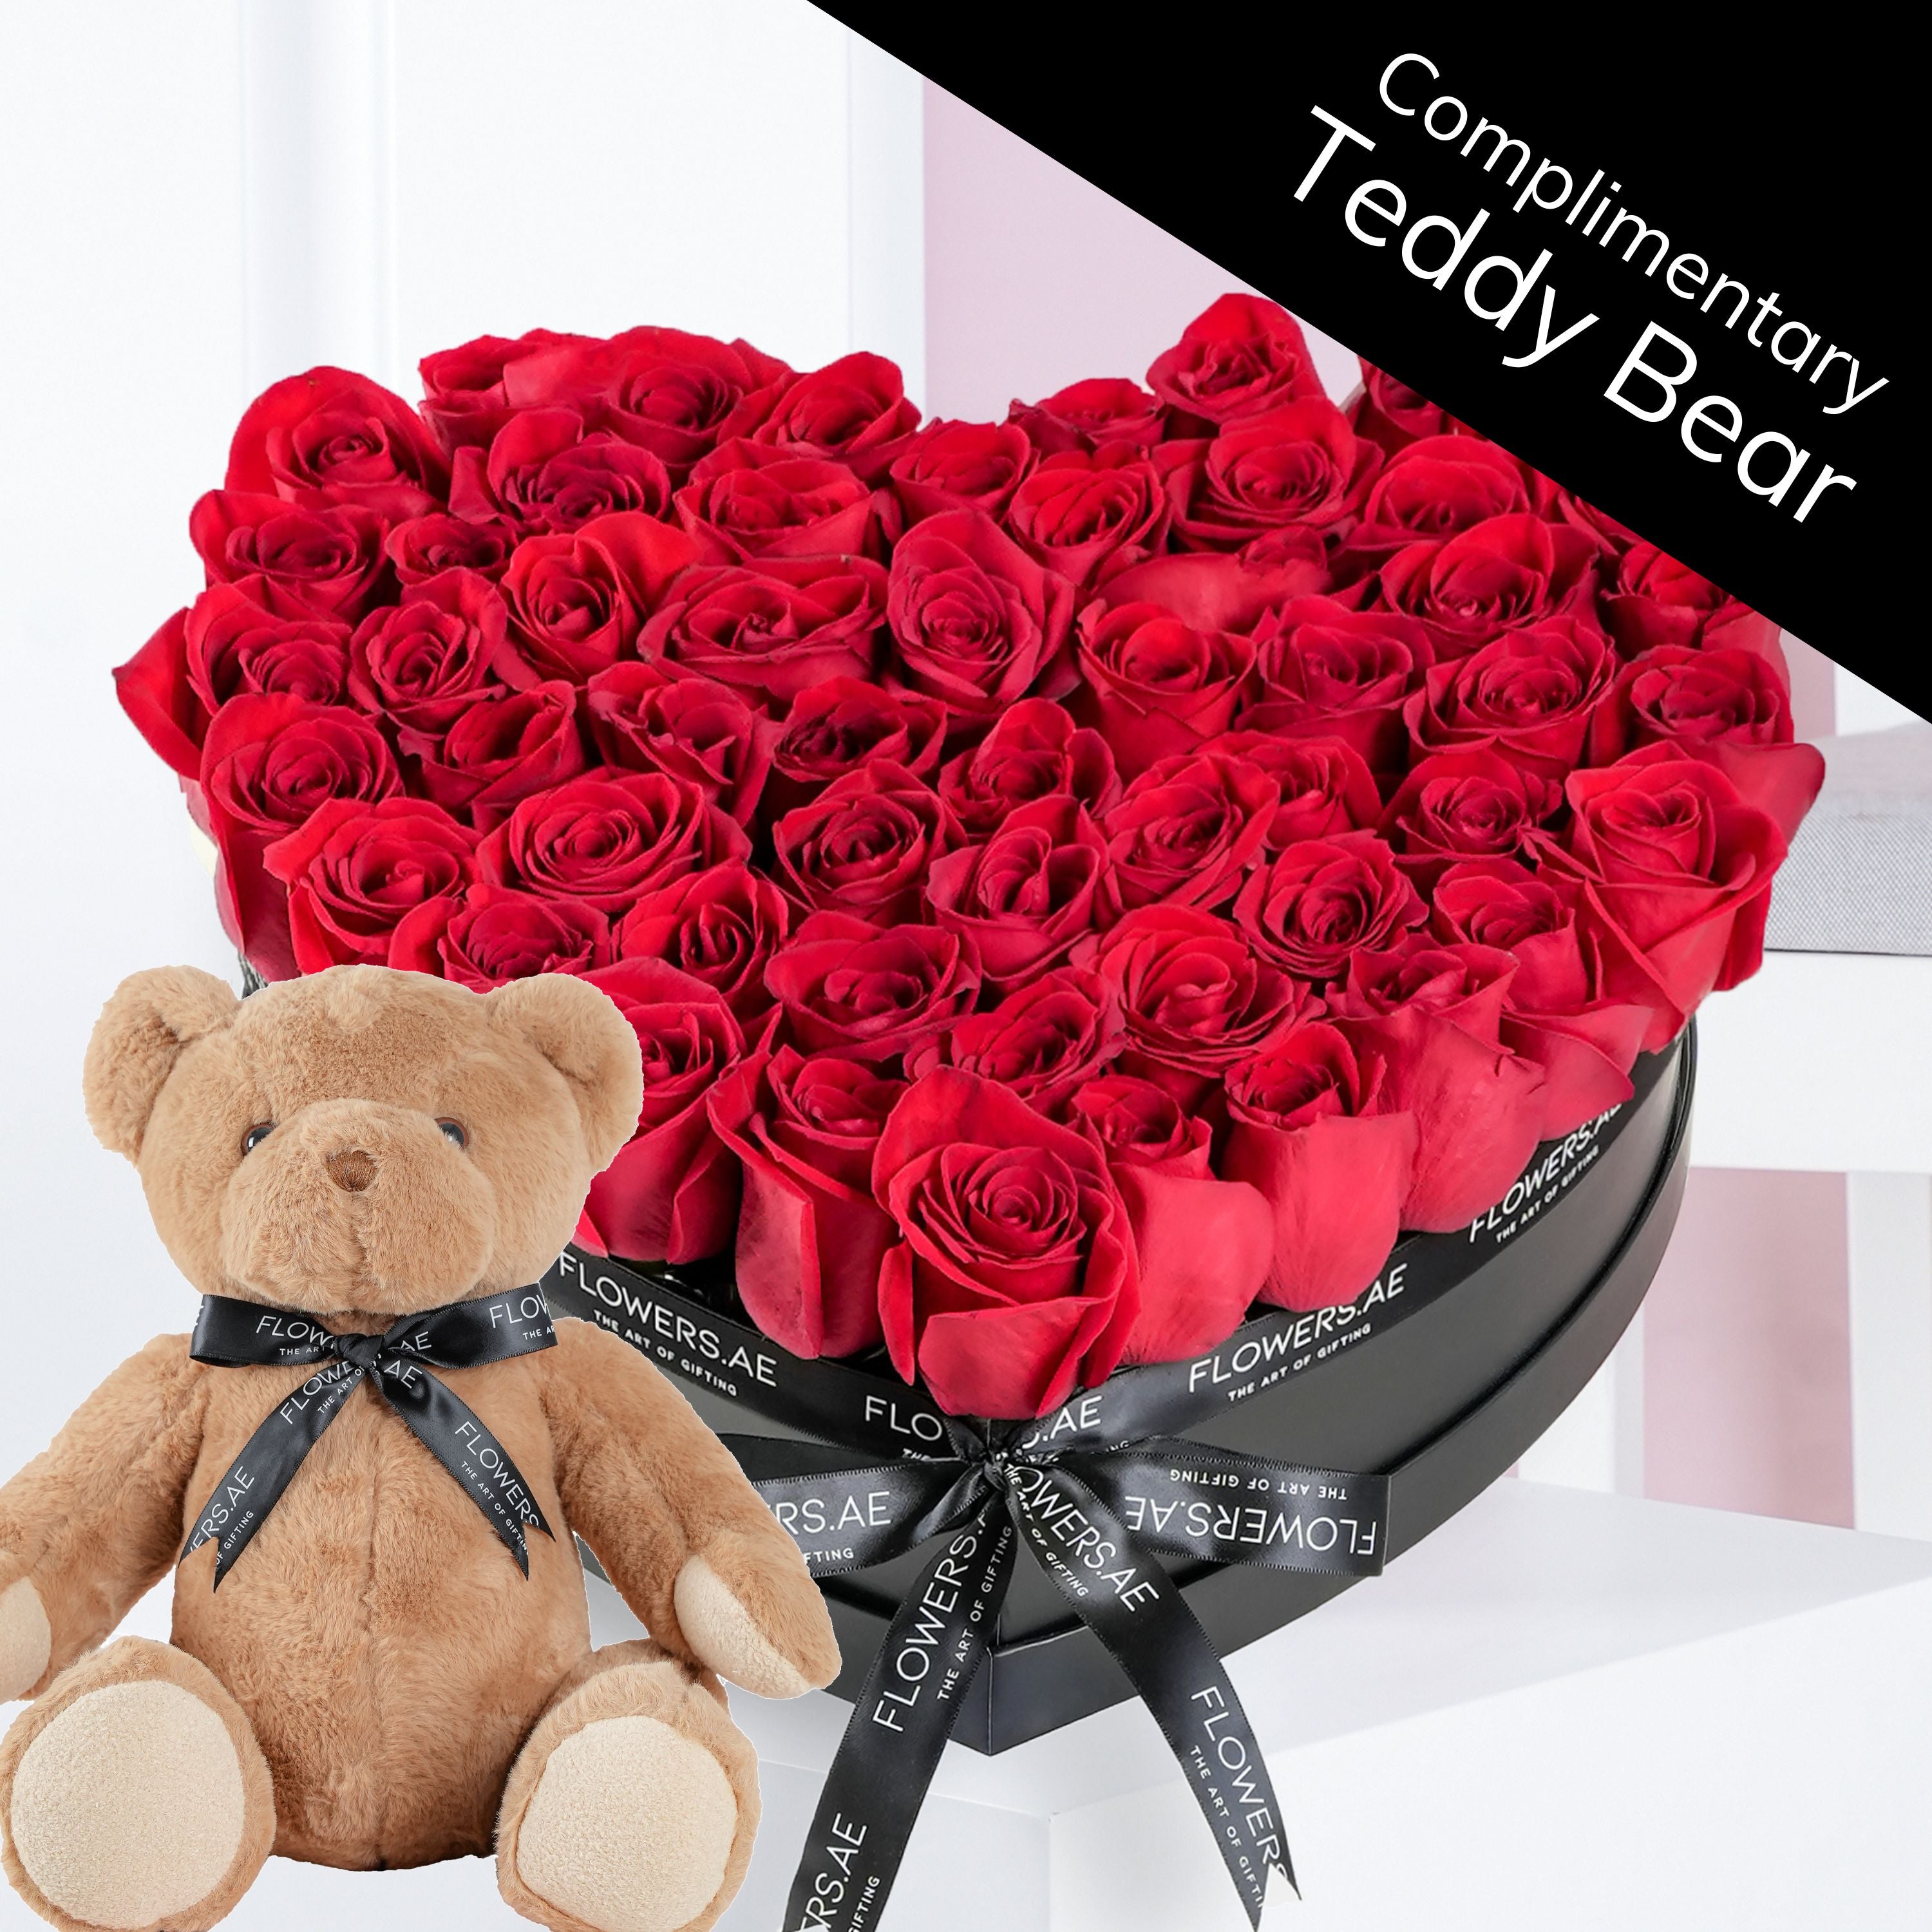 Anniversary Red Heart - Standard - Free Same-Day Delivery to all Emirates 